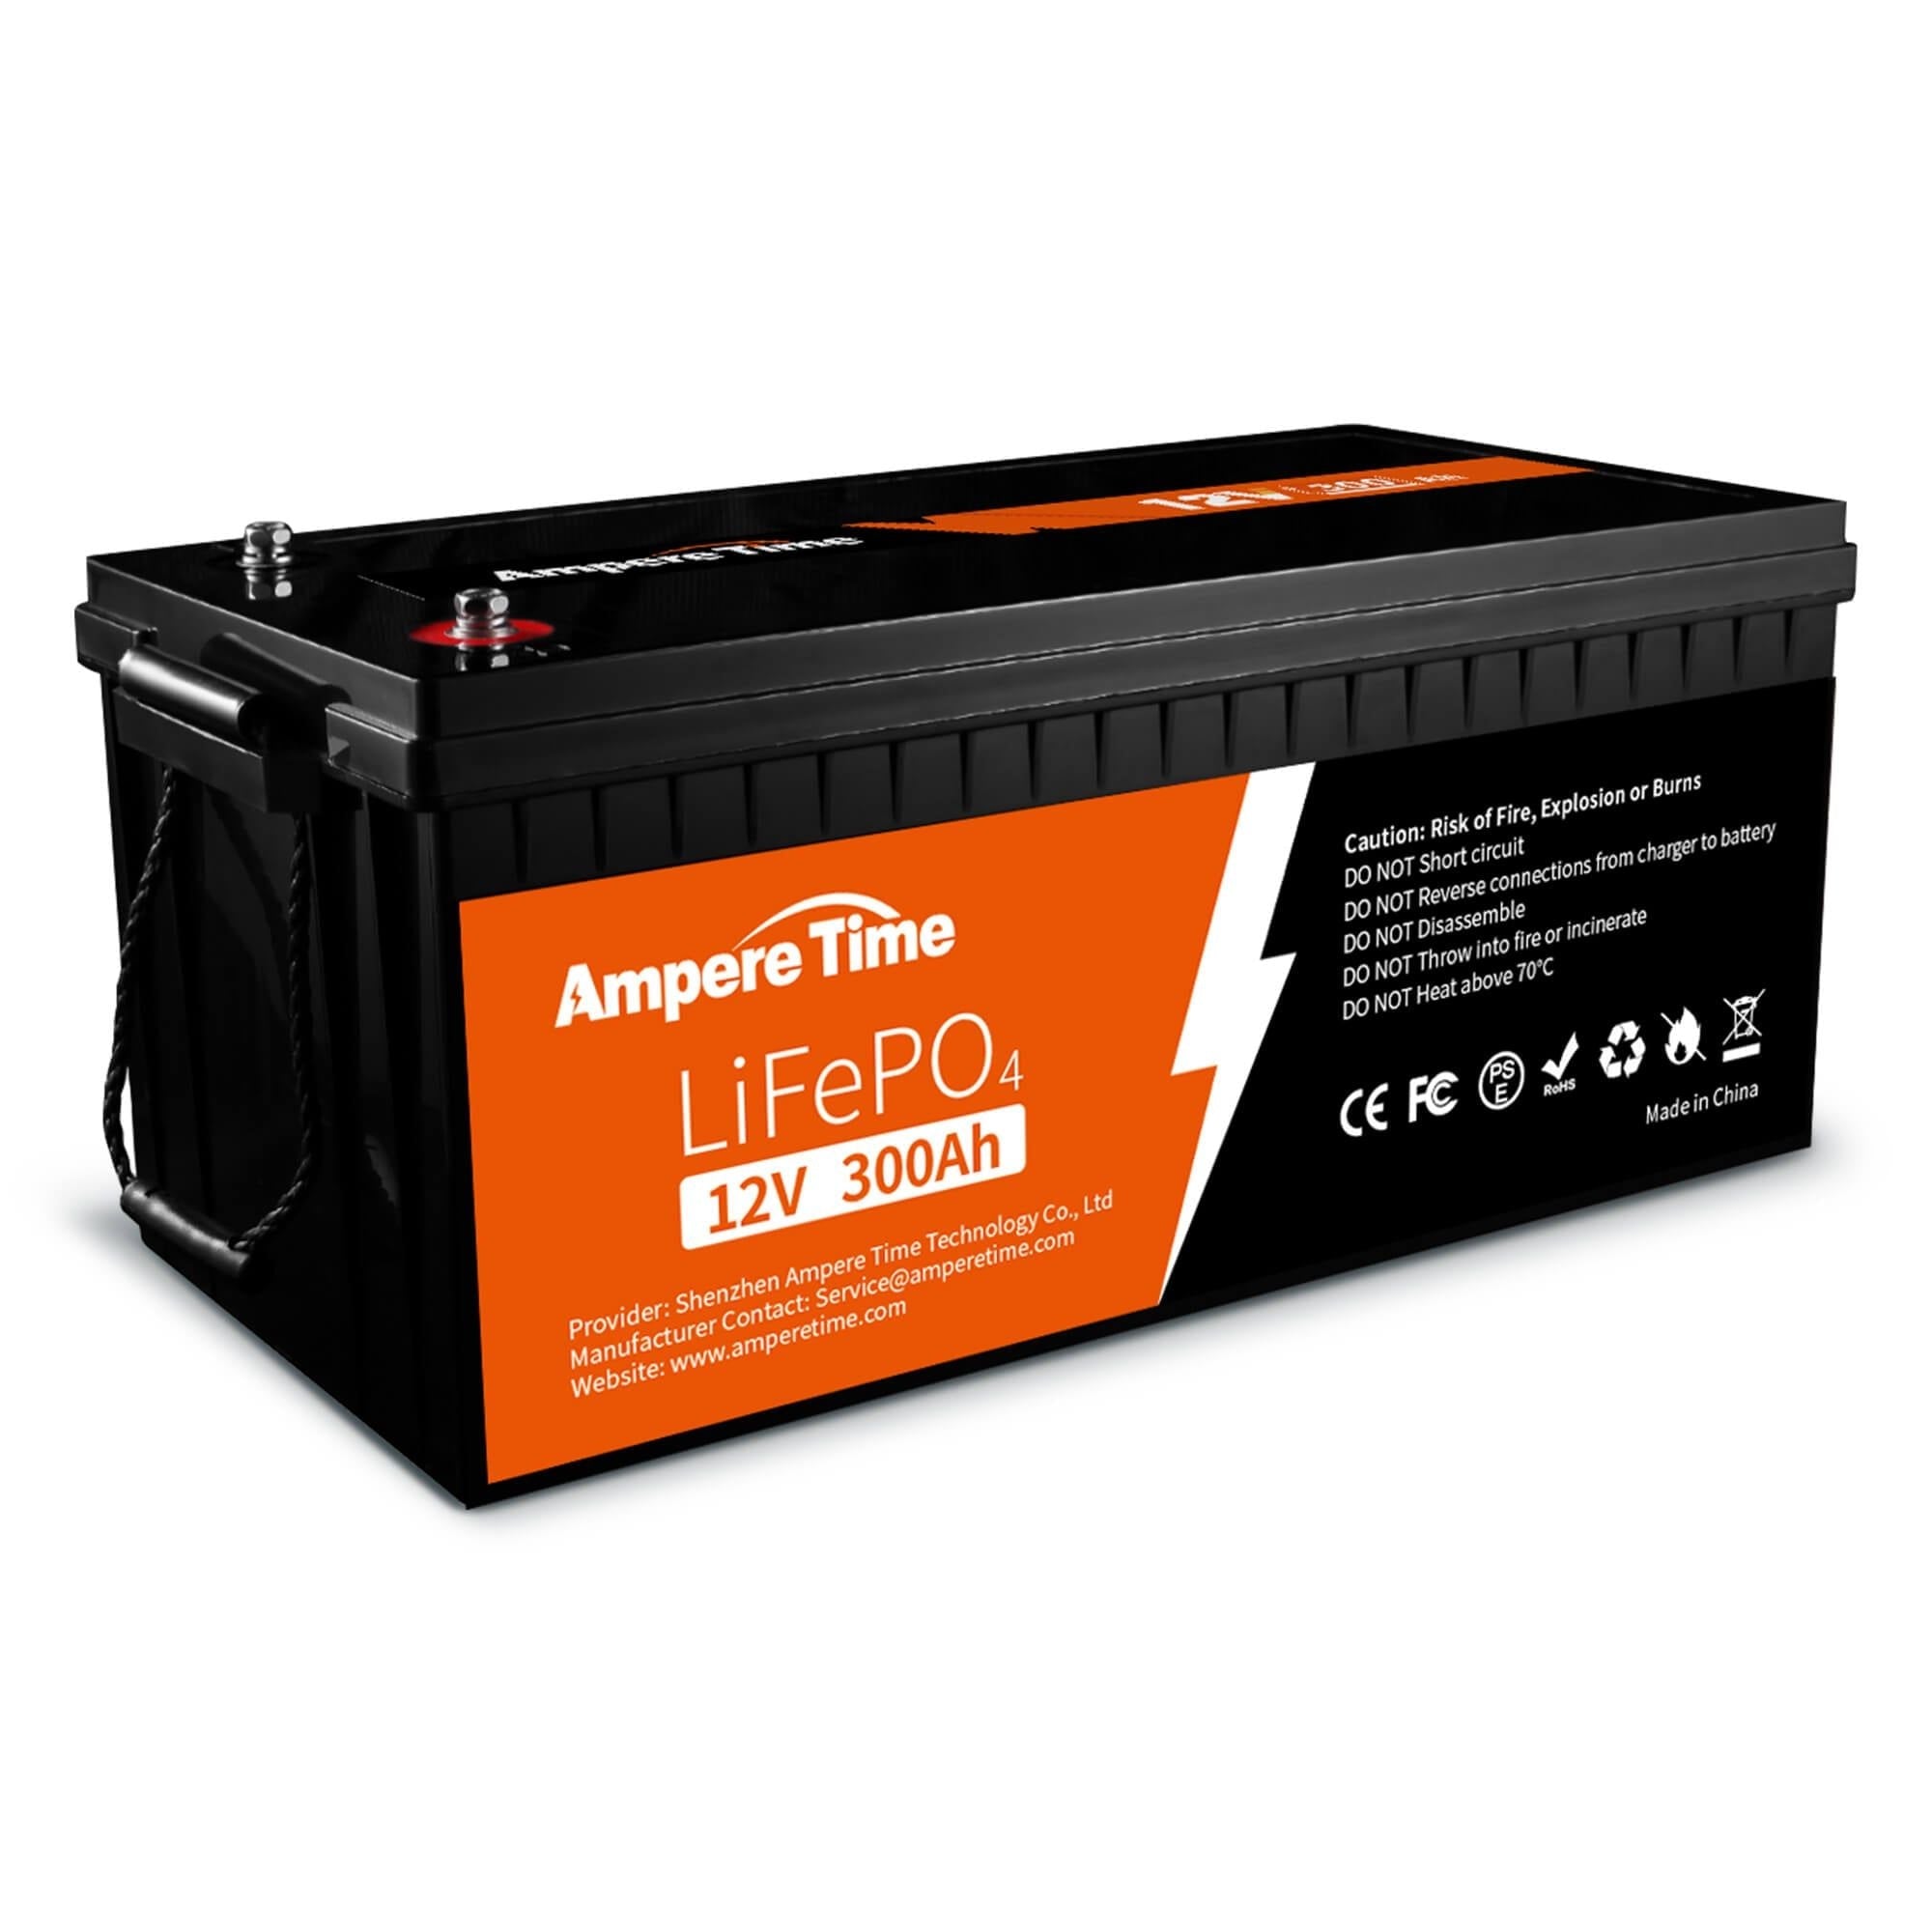 Ampere Time 12V 300Ah Lithium LiFePO4 Battery Ampere Time